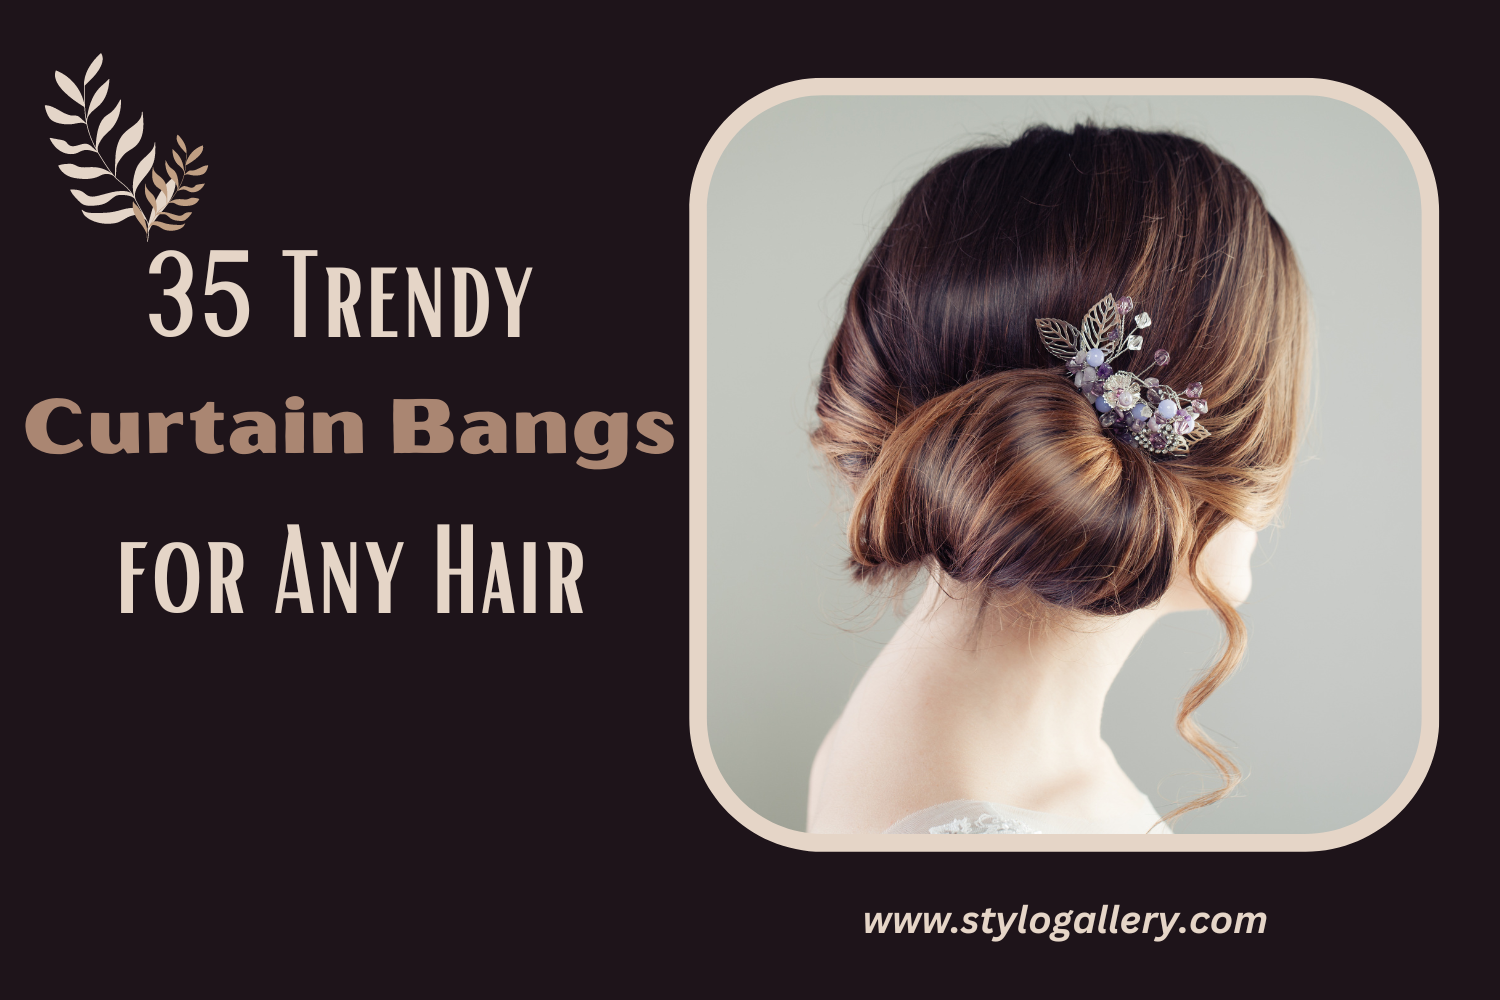 Get the Look: 35 Trendy Curtain Bangs for Any Hair